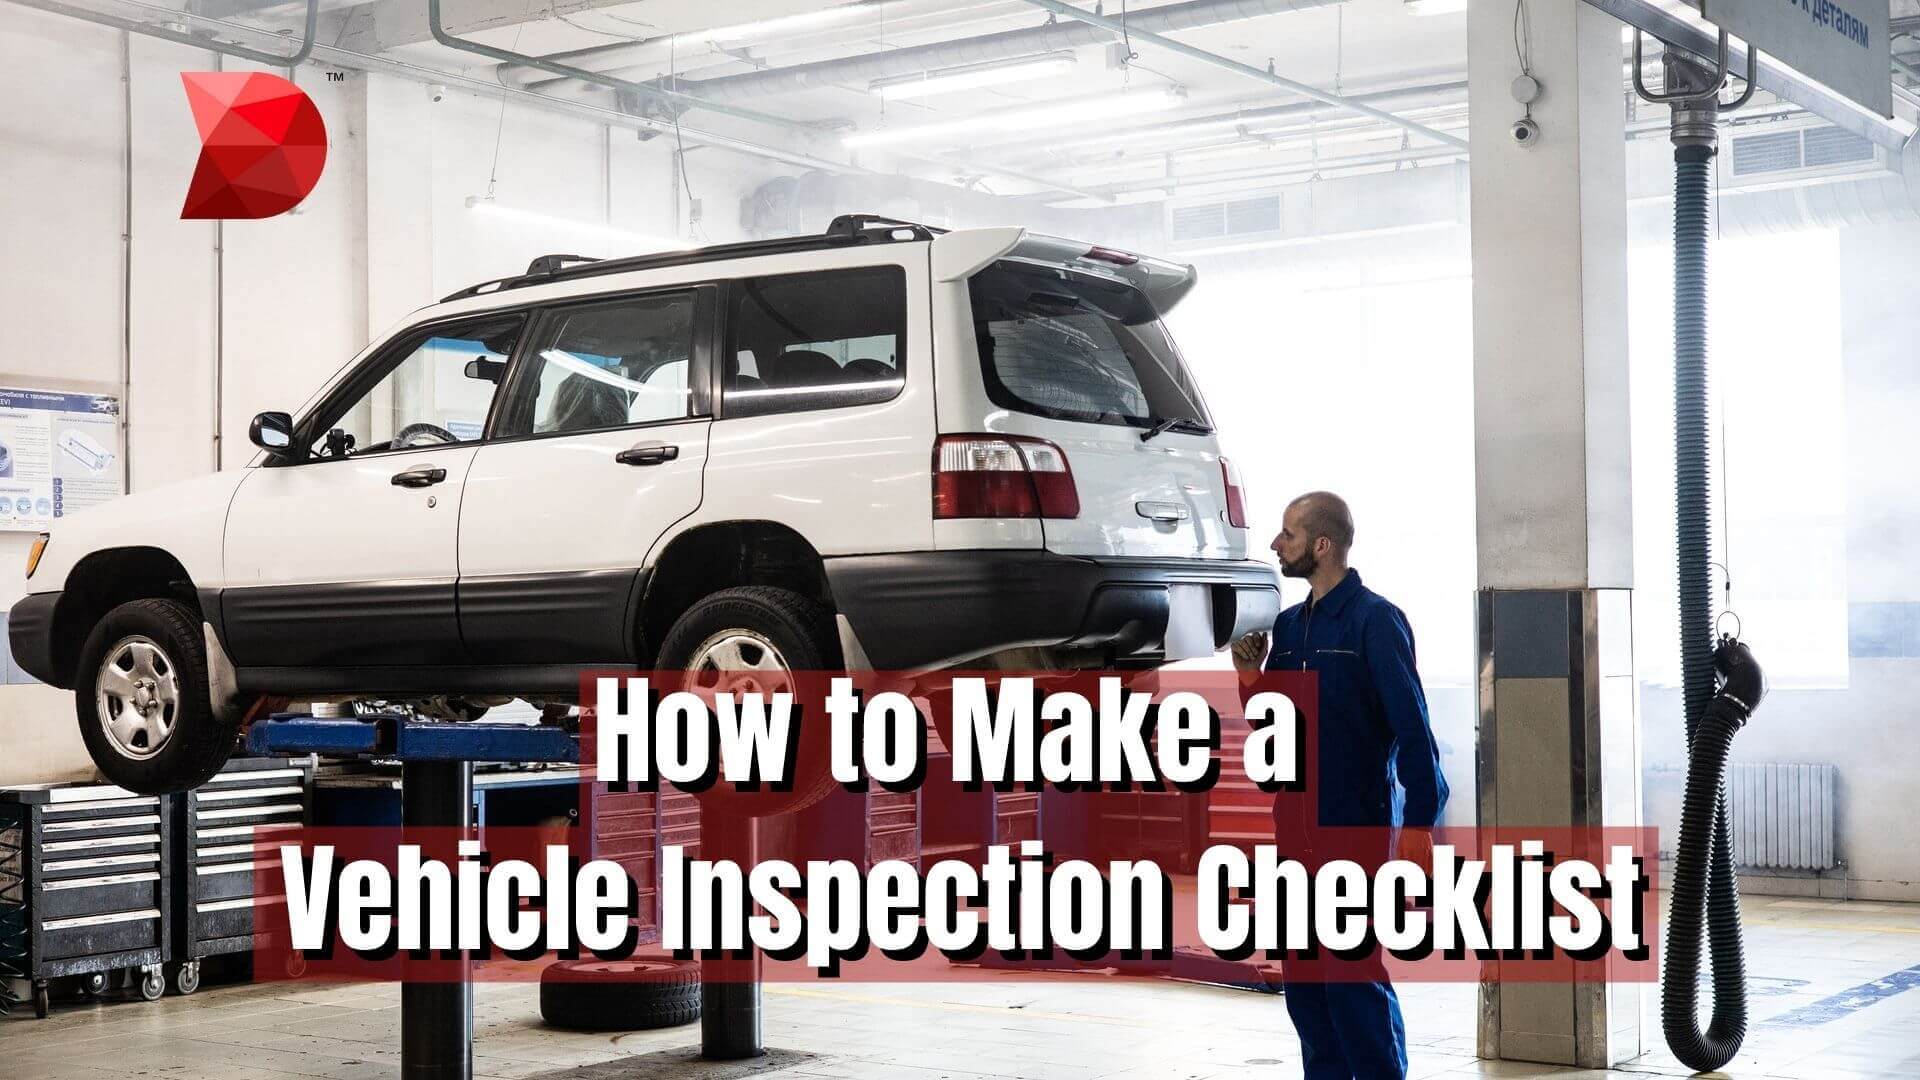 How to Make a Vehicle Inspection Checklist